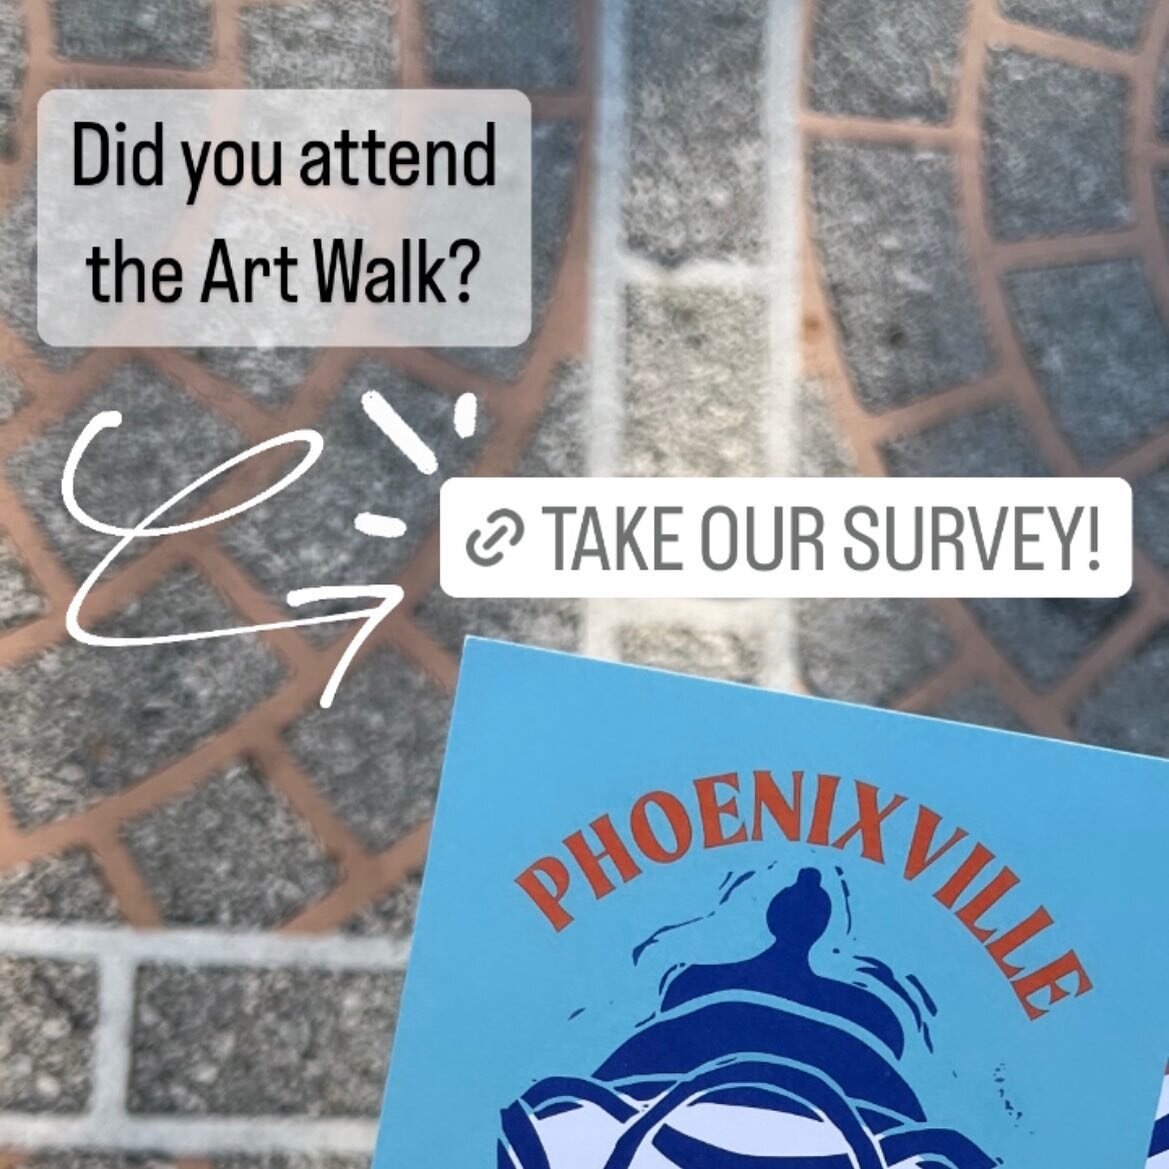 We would love to hear your thoughts! Link in bio to take our survey!

#phoenixvilleartwalk #pxvartwalk #pxvartwalk2023 #phoenixville #phoenixvillepa #artistsofpxv #phoenixvilleart #phoenixvilleartist #phoenixvilleartists #chestercountypa #chestercoun